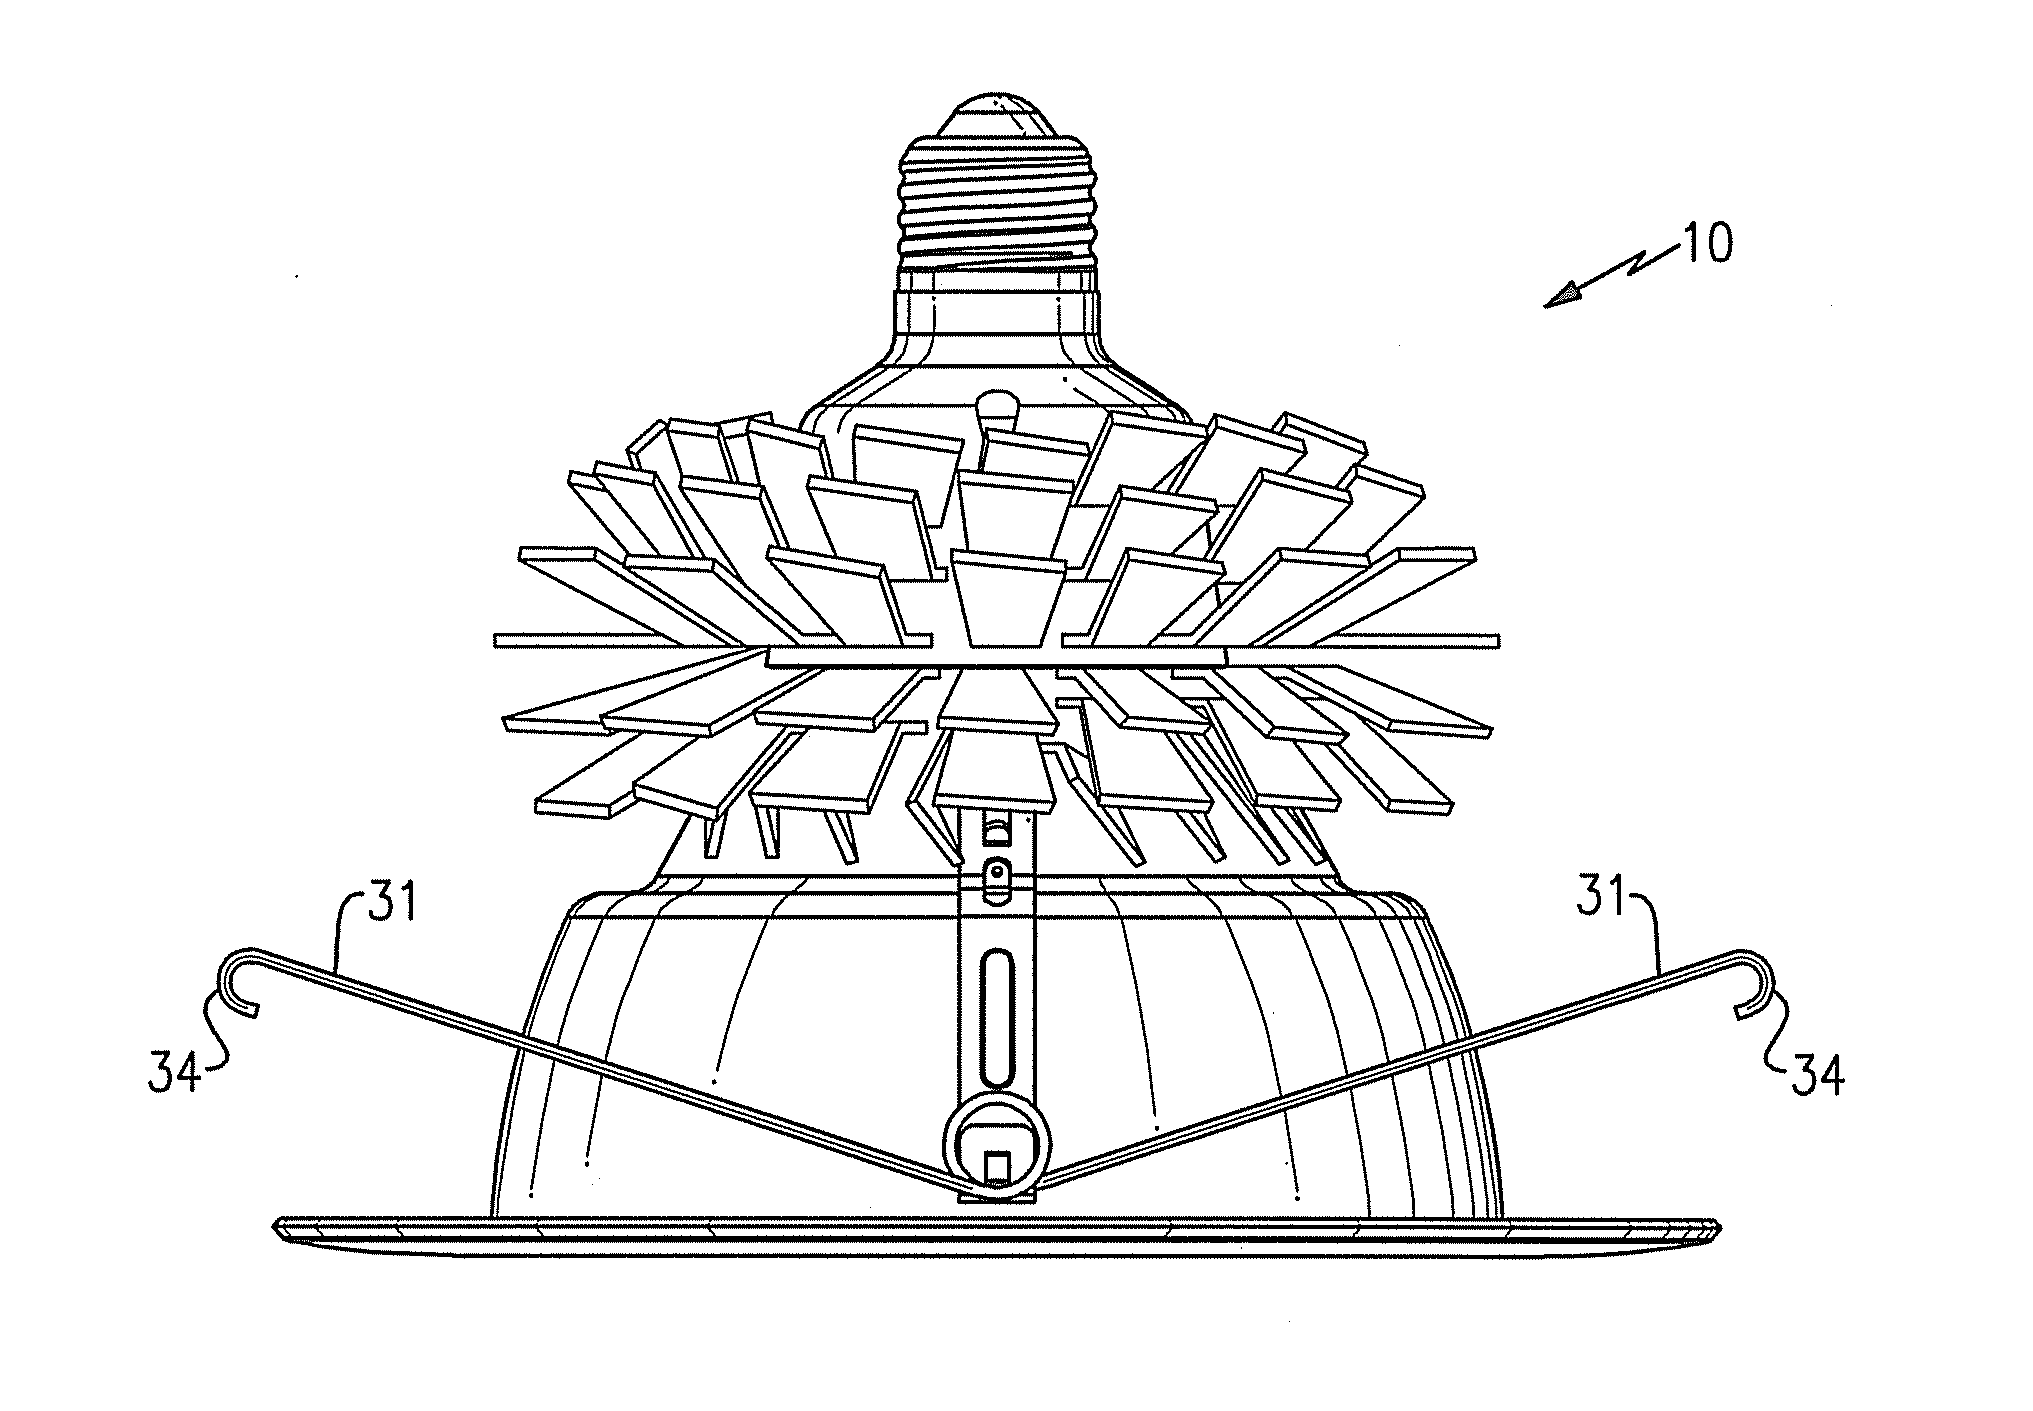 Lighting device with one or more removable heat sink elements